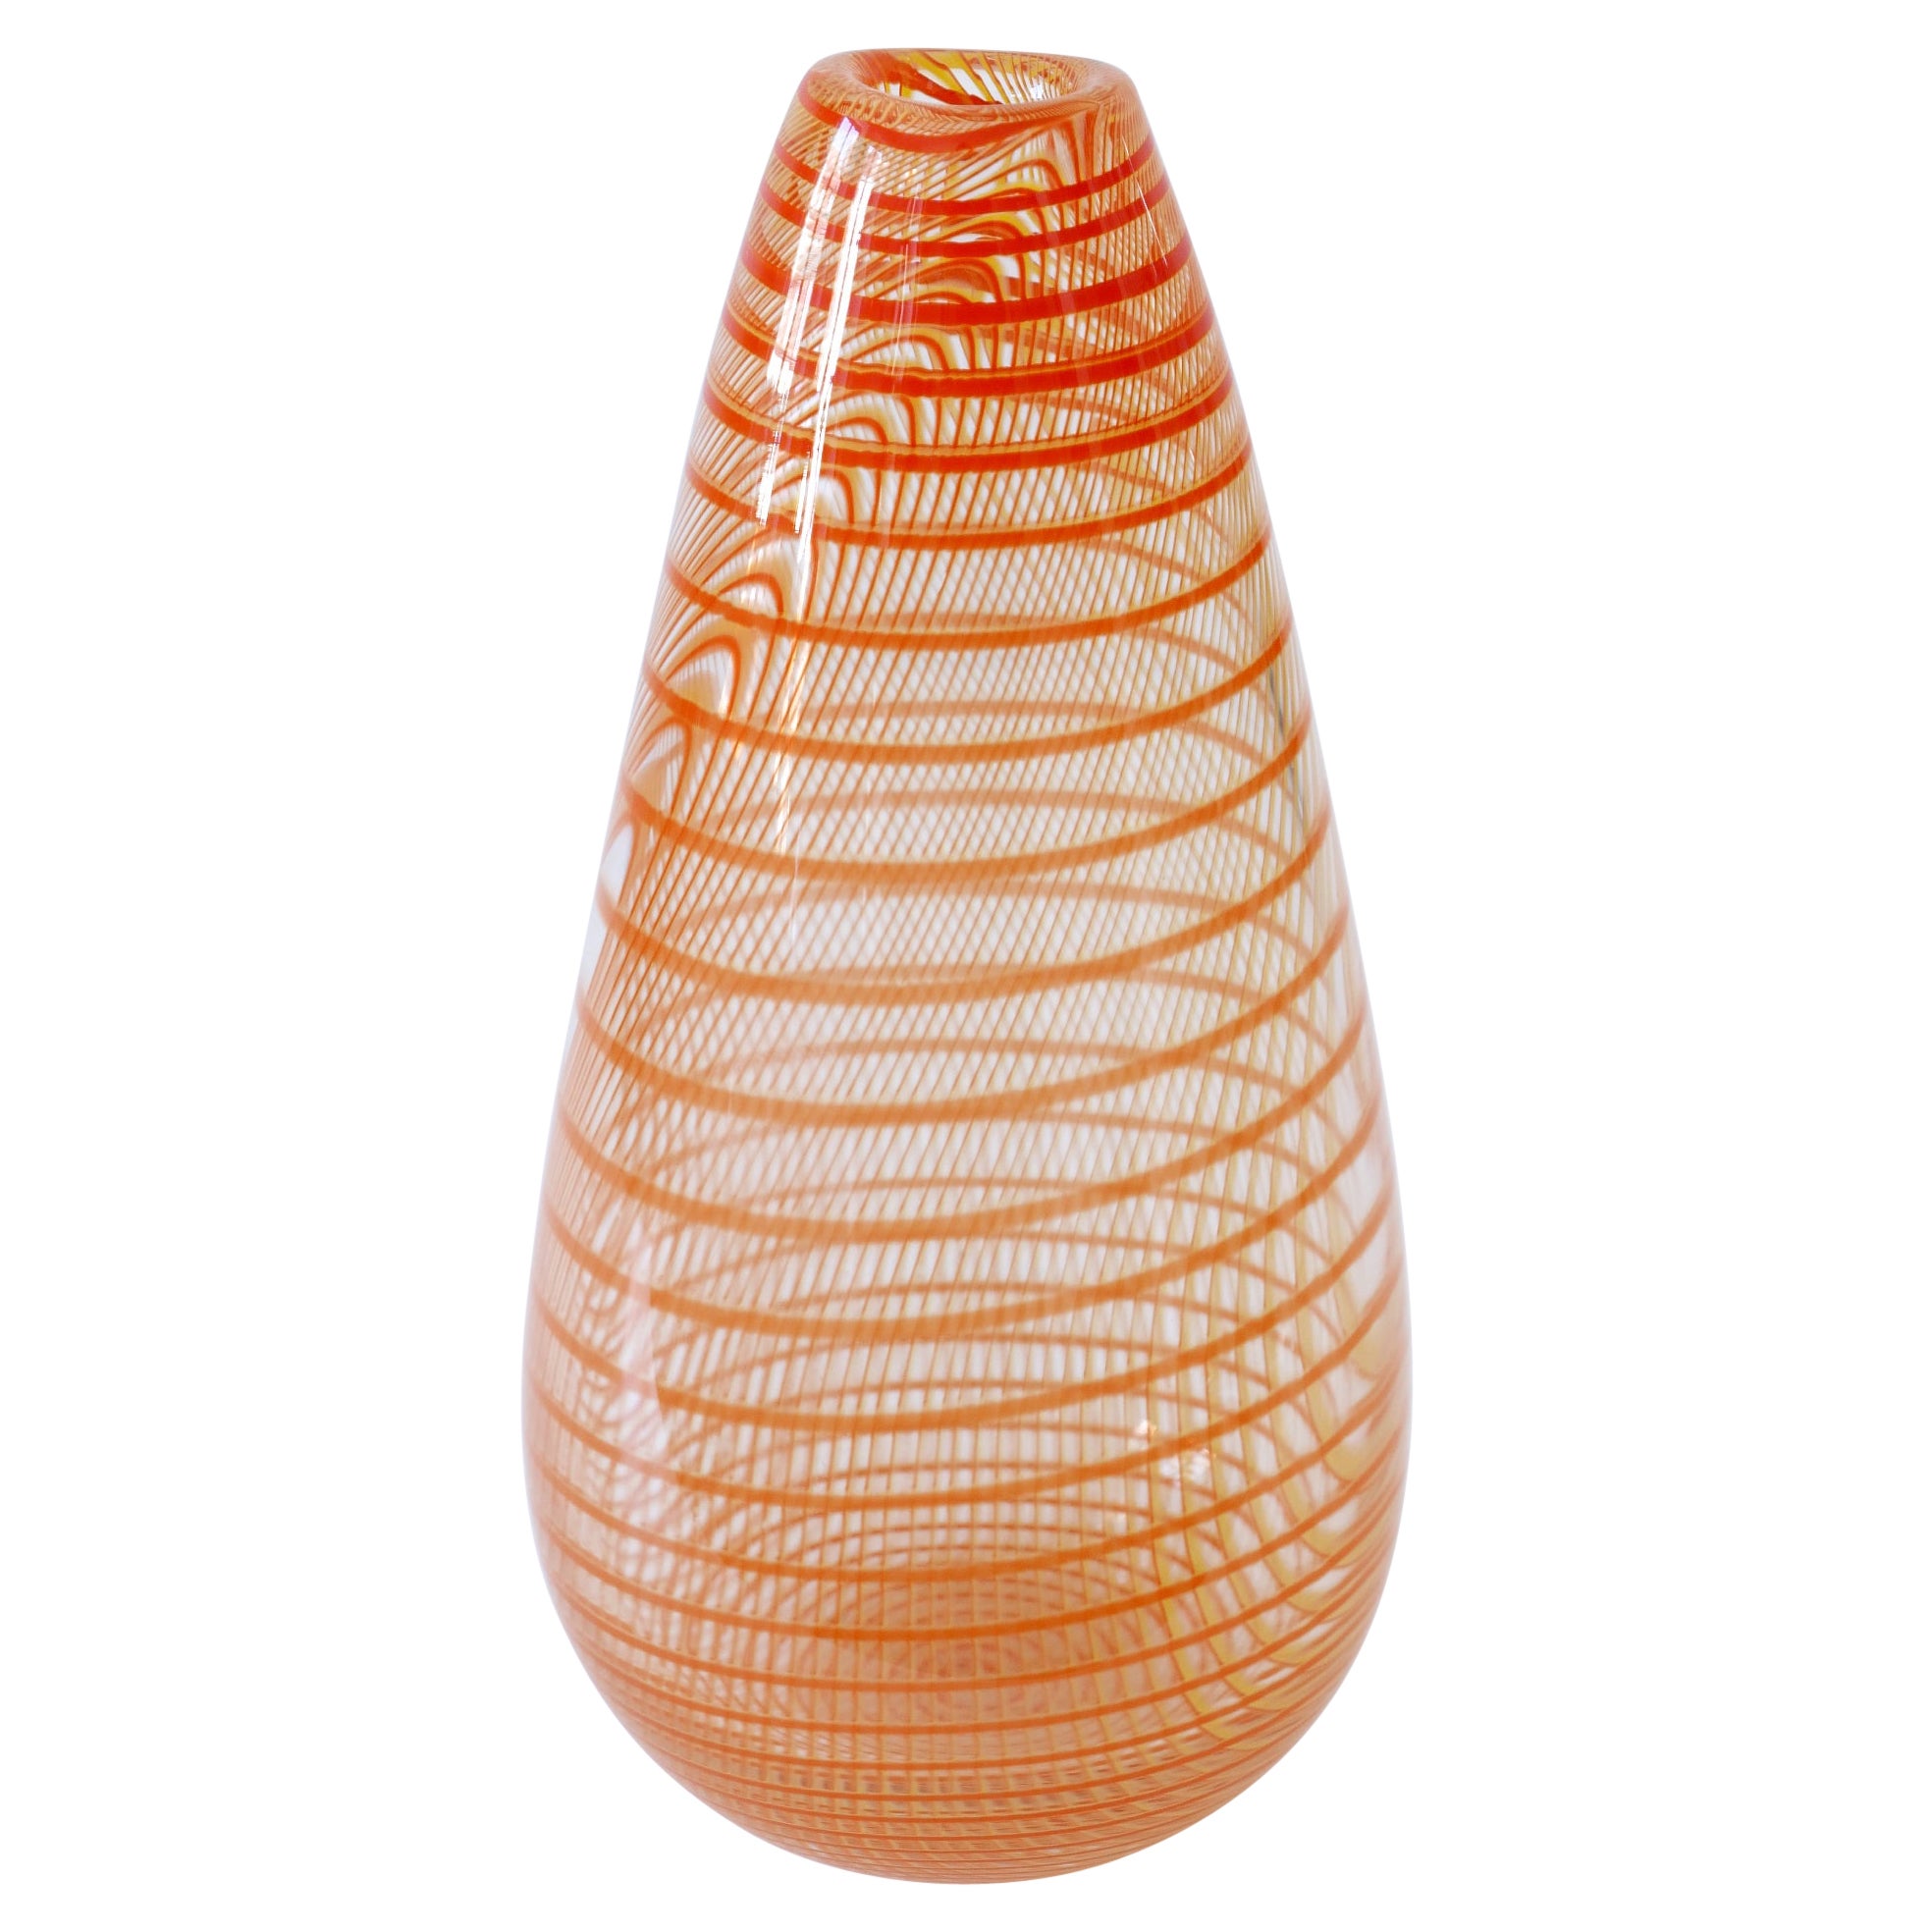 Signed & Limited Edition Art Glass Vase by Olle Brozén for Kosta Boda Sweden For Sale